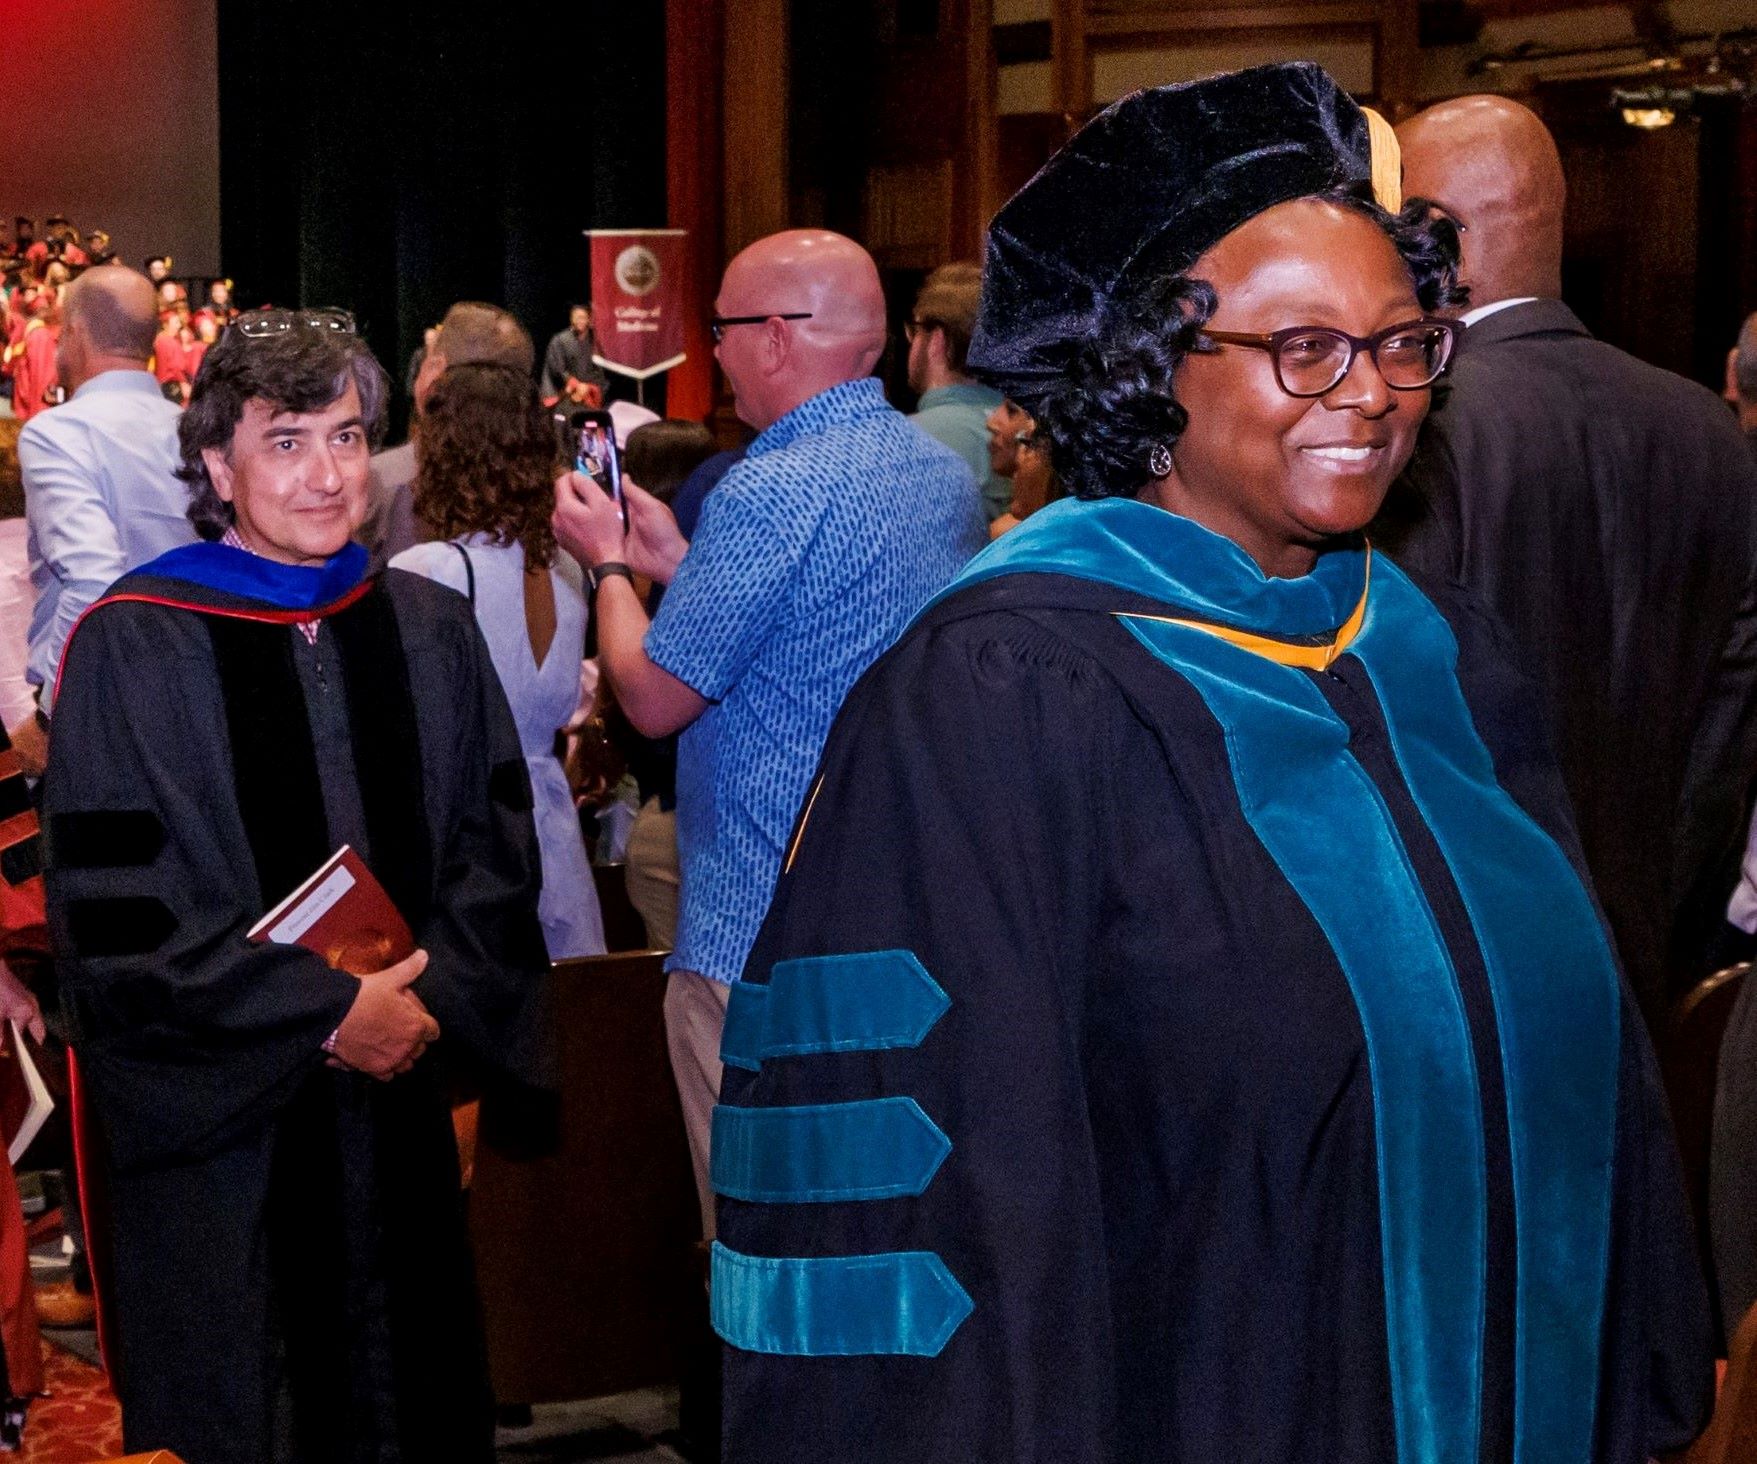 Interim Dean Alma Littles and Provost Jim Clark during the recessional